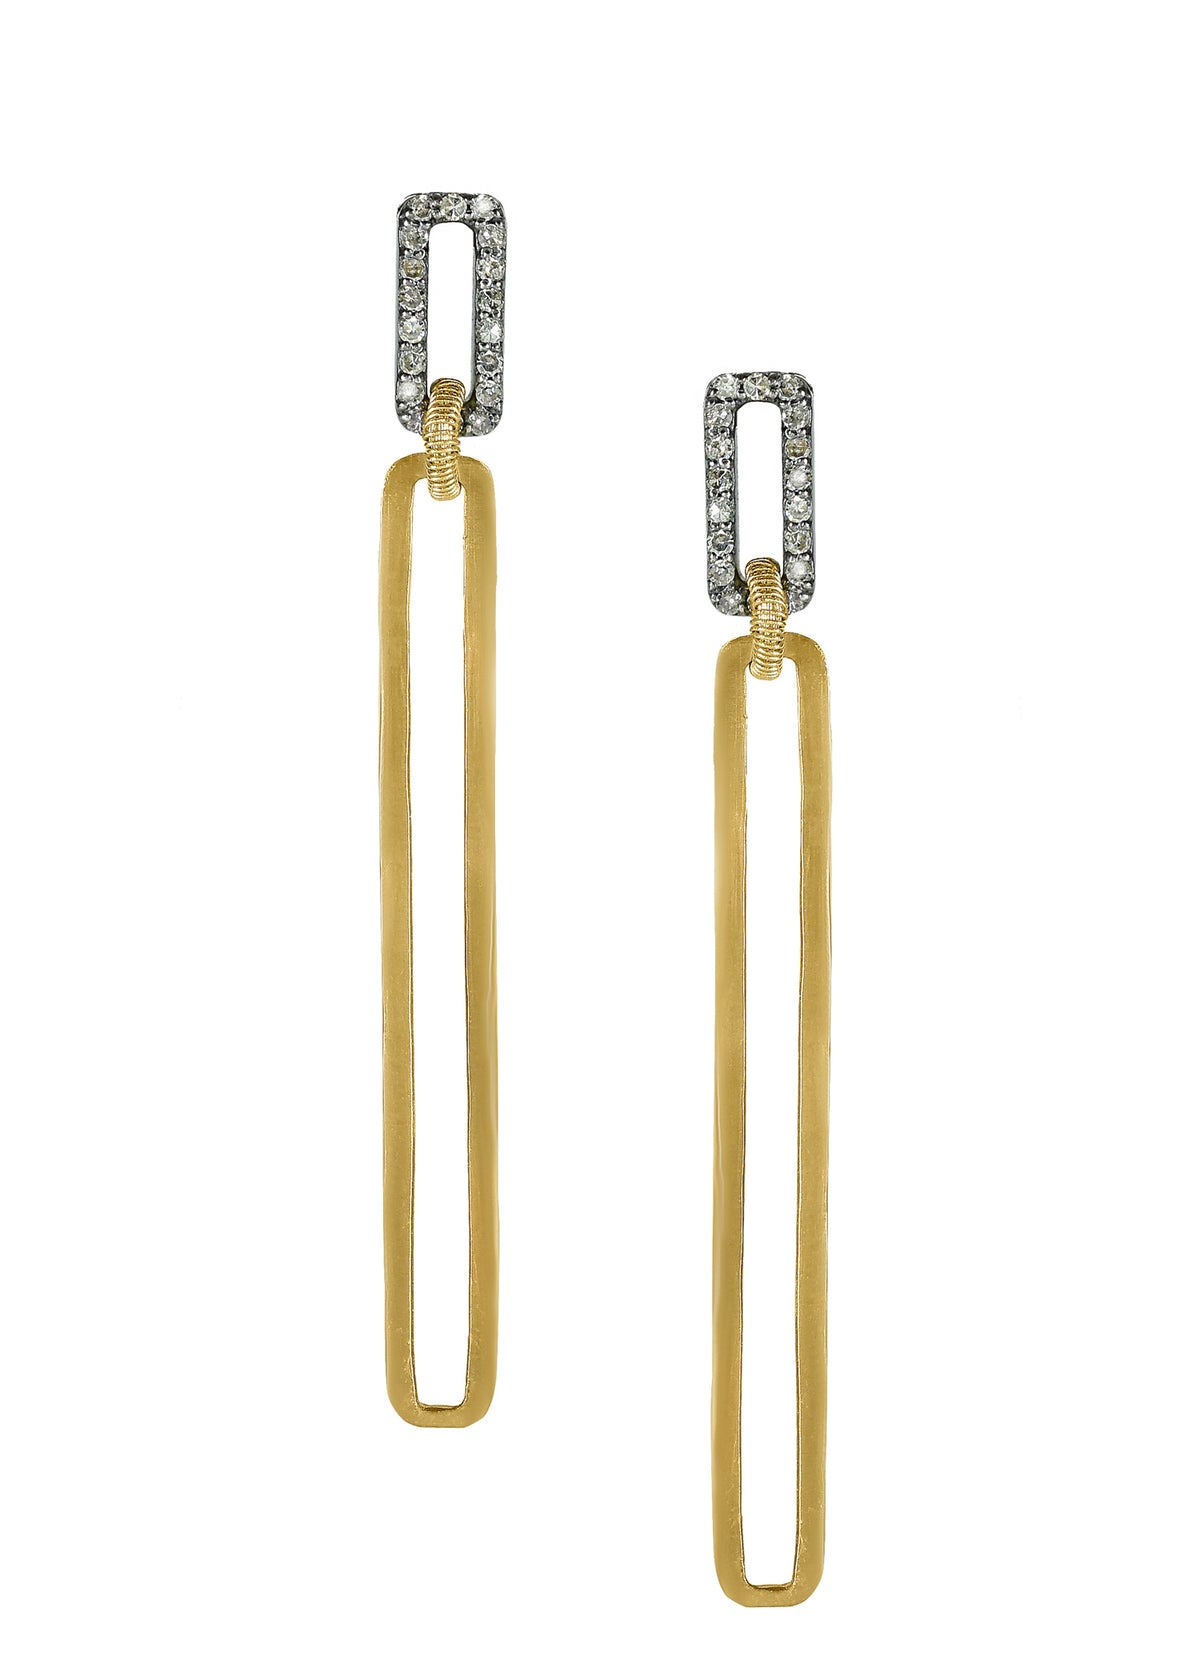 Diamond 14k gold Sterling silver Mixed metal Special order only Earrings measure 2&quot; in length (including the posts) and 3/16&quot; in width Handmade in our Los Angeles studio 